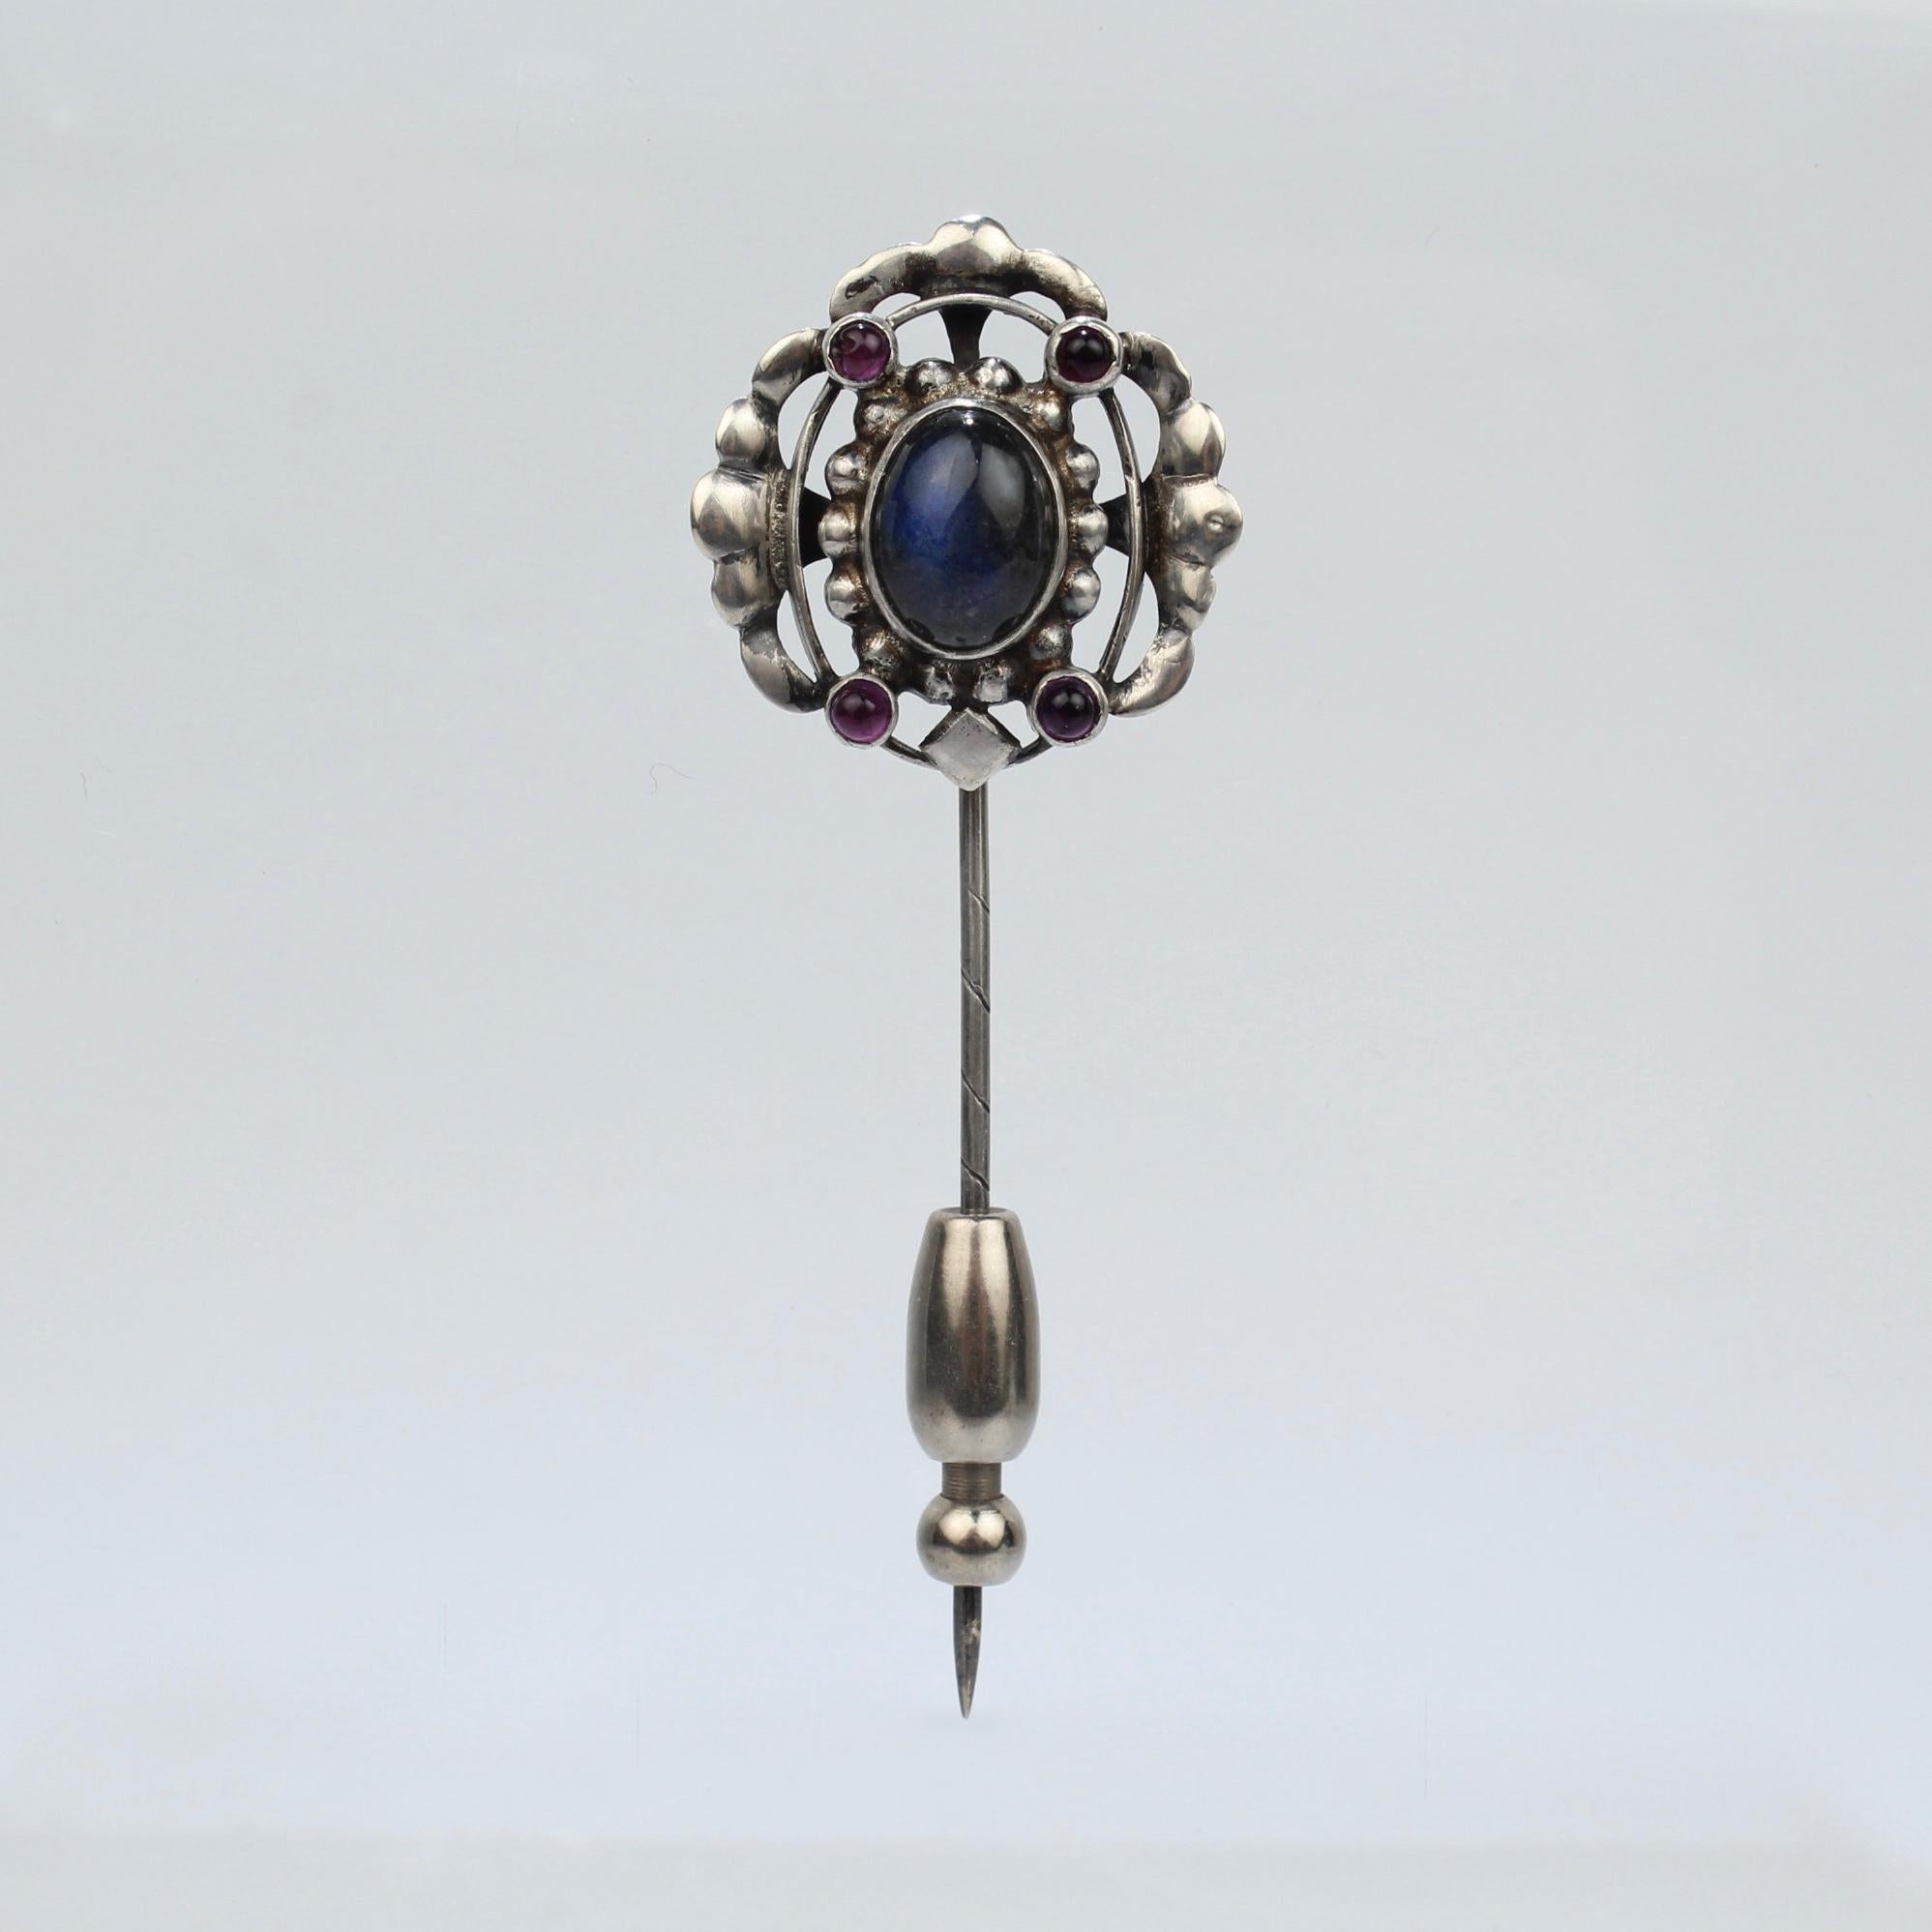 A rare Georg Jensen silver stick pin.

Model no. 17. 

Set with a central Labradorite cabochon and four small amethyst cabochons. (And accompanied by an added safety slide for extra security).

Dates between 1917 and 1927.

A rare early Jensen piece